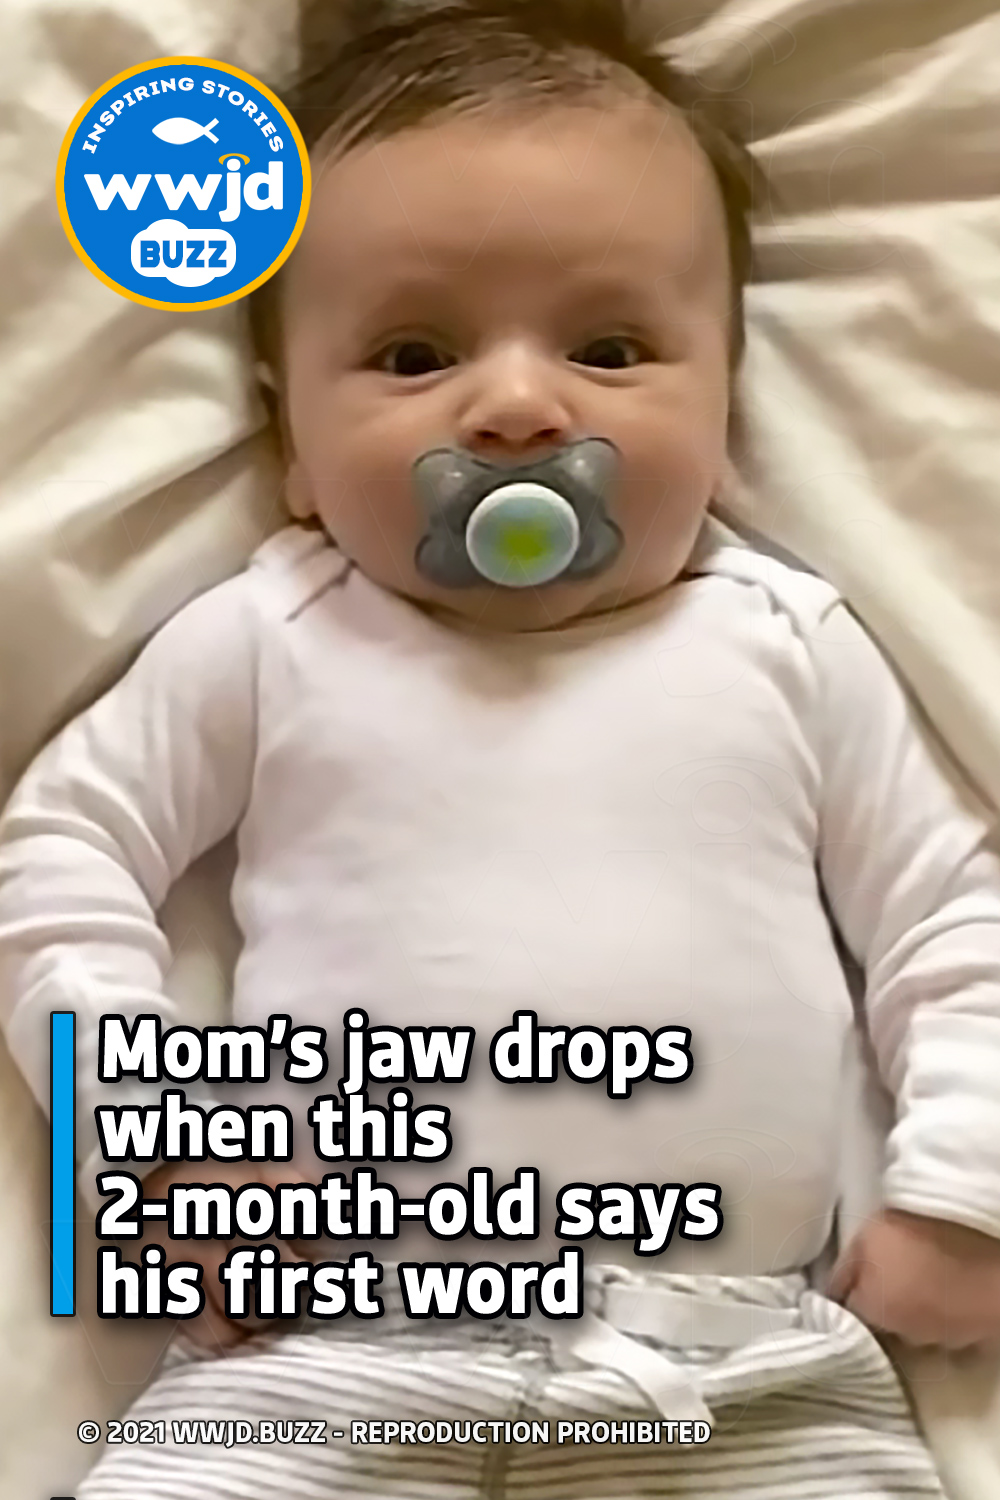 Mom’s jaw drops when this 2-month-old says his first word